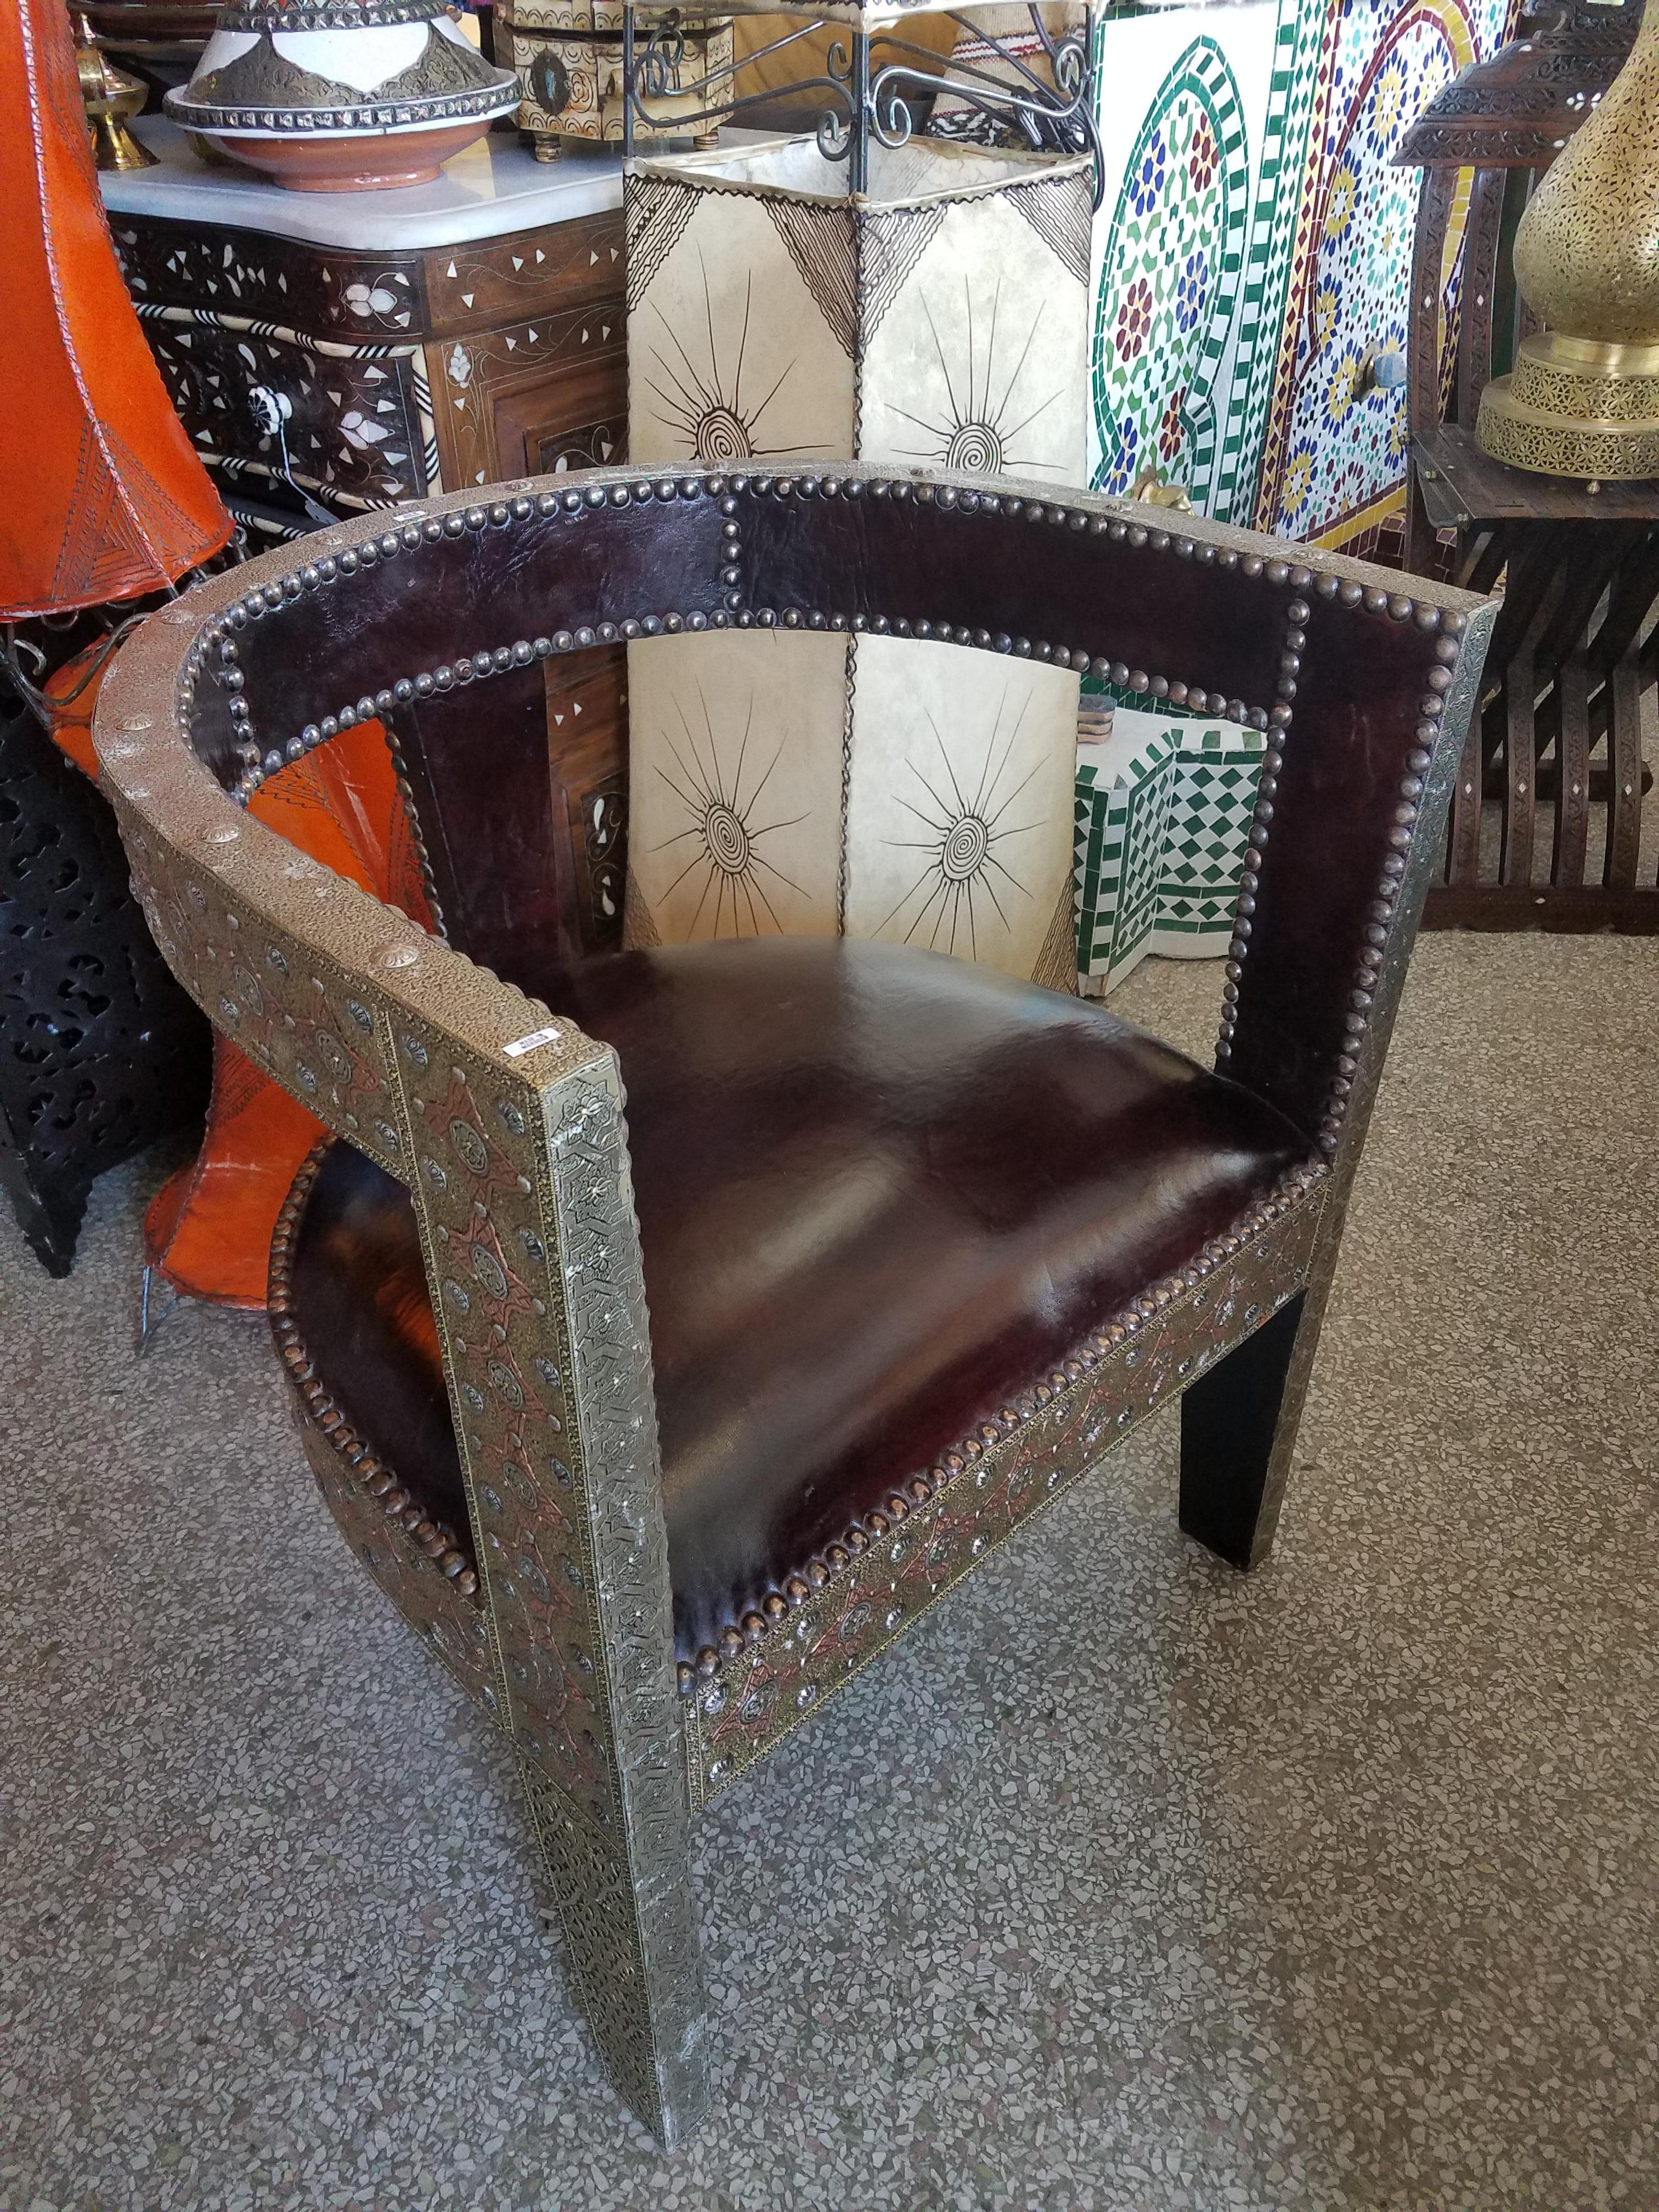 An amazing Cedar wood chair.
Handmade Moroccan wooden chair with genuine leather cushion and metal inlaid frame throughout, measuring approximately 29